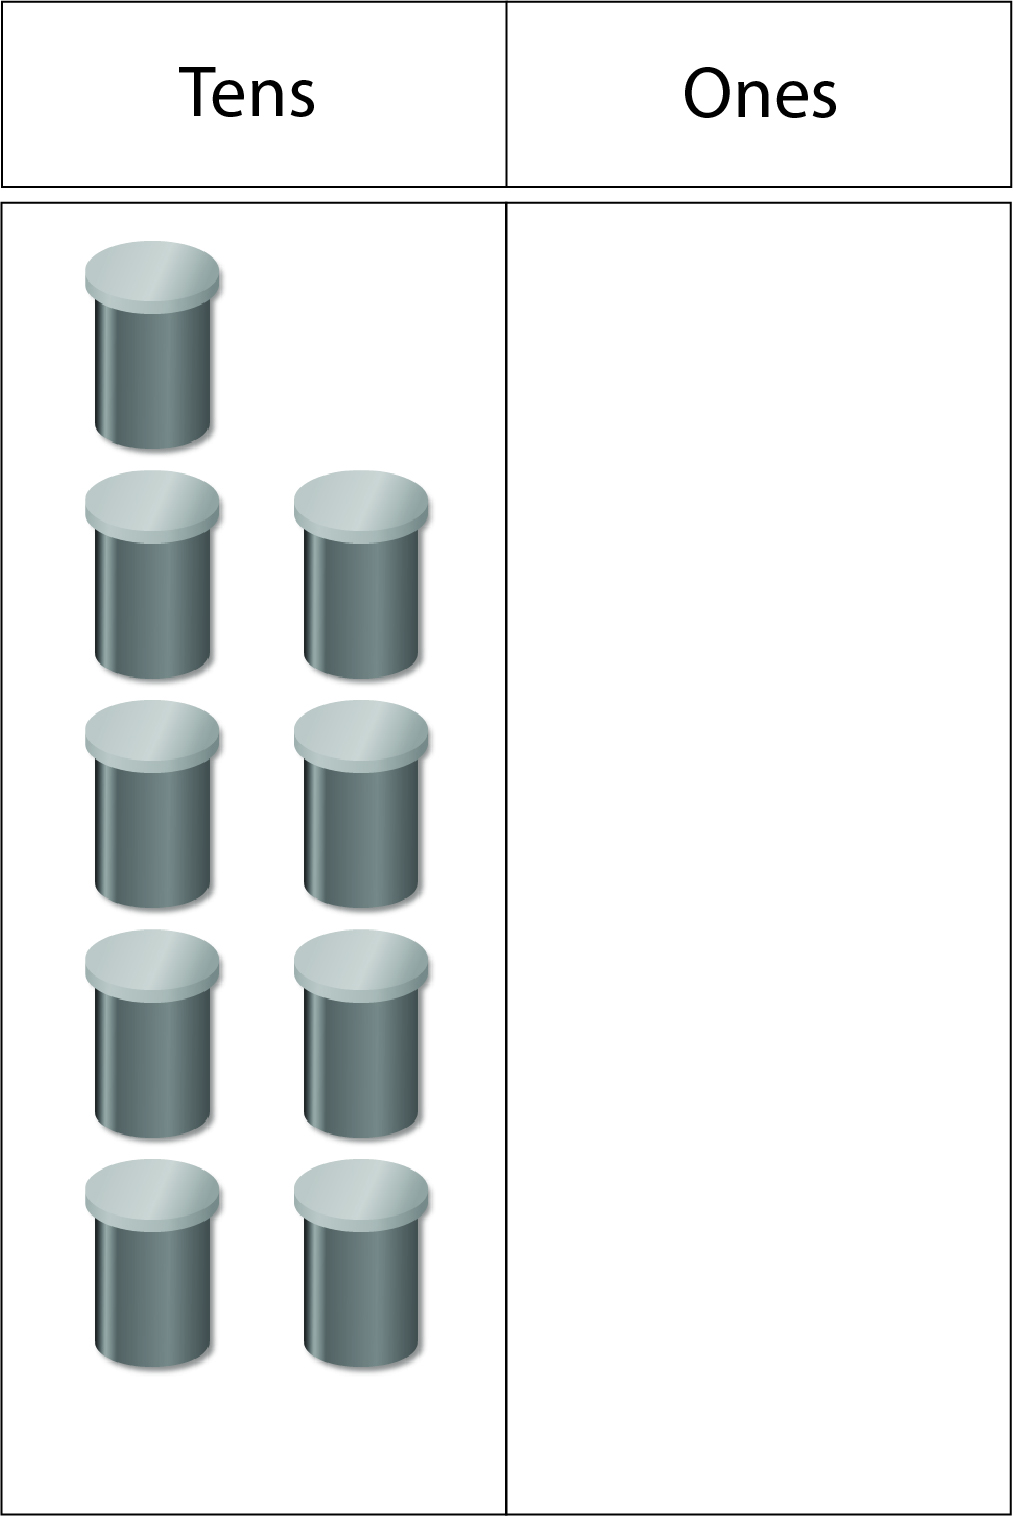 Image of nine ten-bean canisters organised in the tens column of a two column (tens and ones) place value board.